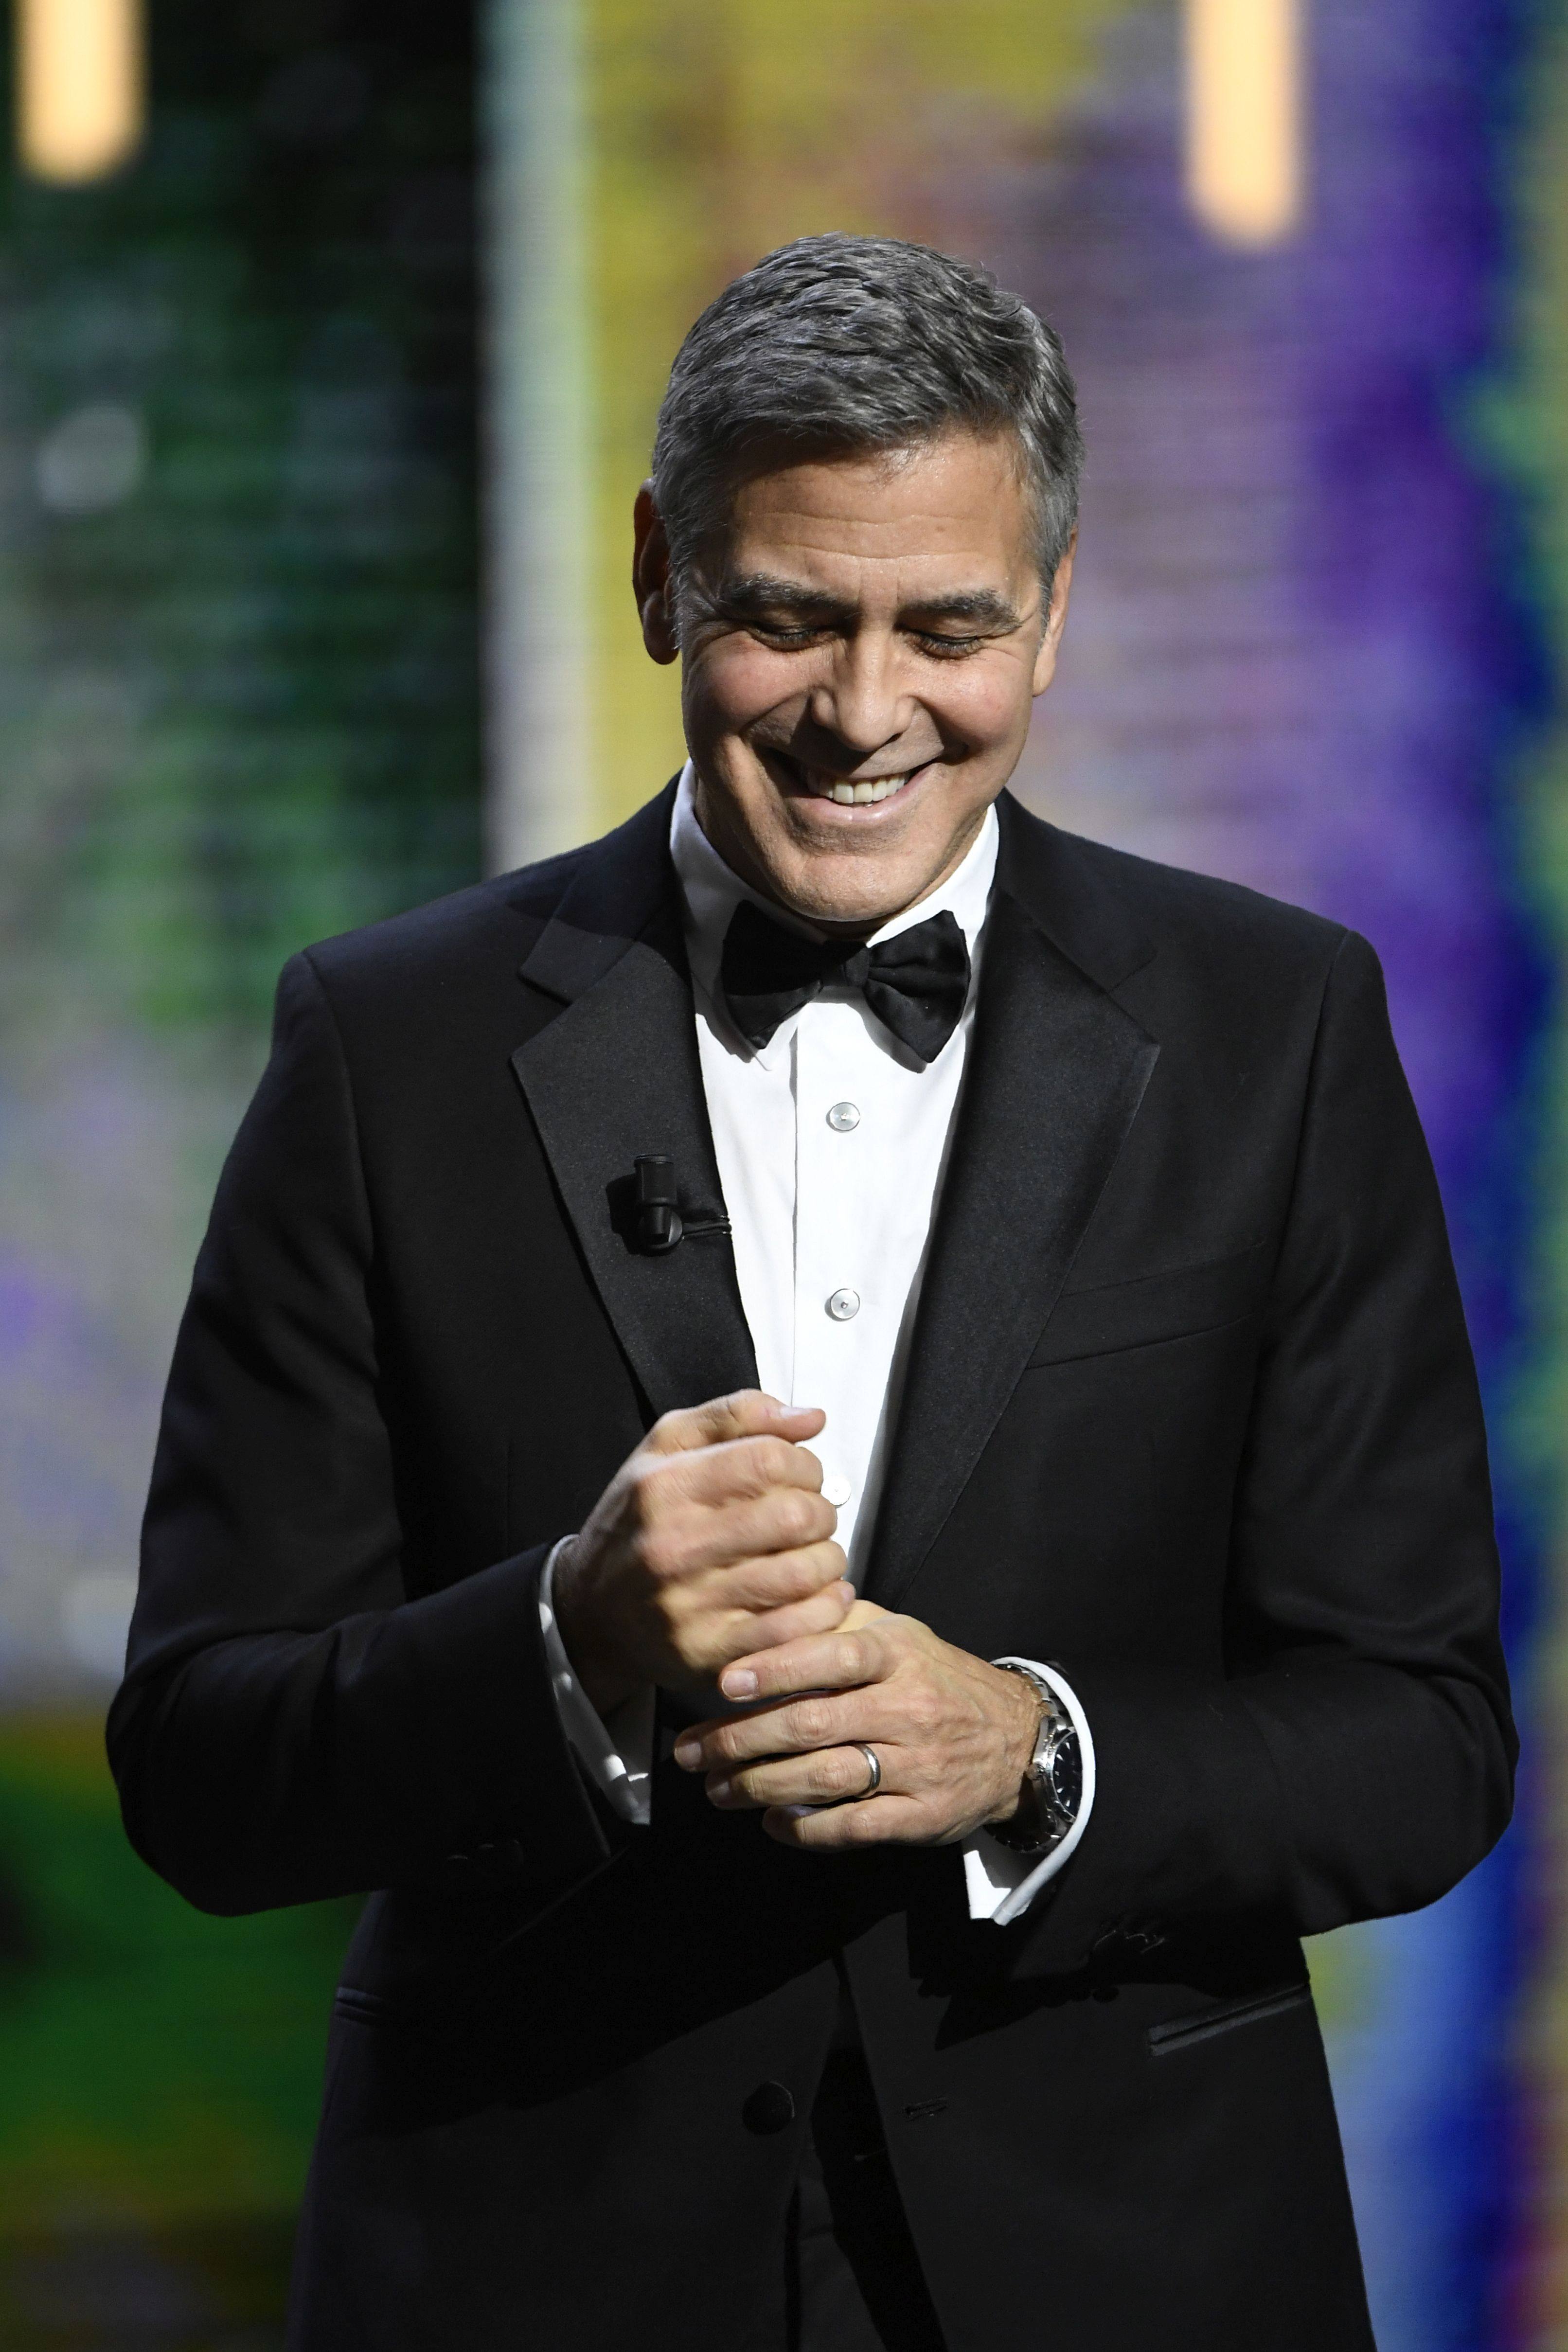 US actor George Clooney arrives on stage to receive an honorary award during the 42nd edition of the Cesar Ceremony at the Salle Pleyel in Paris on February 24, 2017. / AFP / bertrand GUAY (Photo credit should read BERTRAND GUAY/AFP/Getty Images)